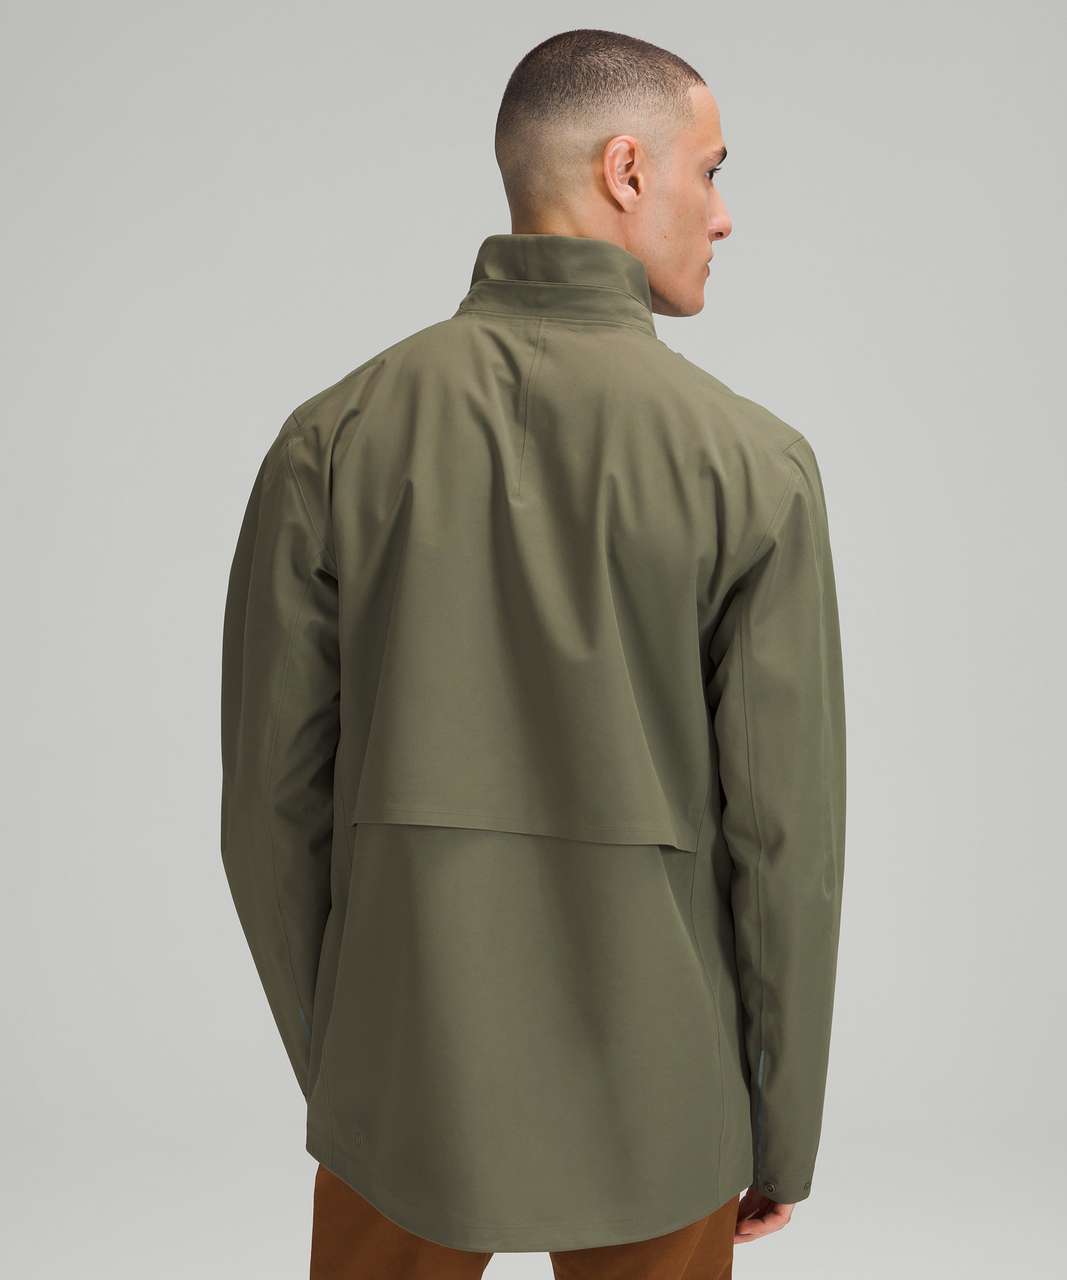 Lululemon Outpour StretchSeal Field Jacket - Medium Olive (First Release)